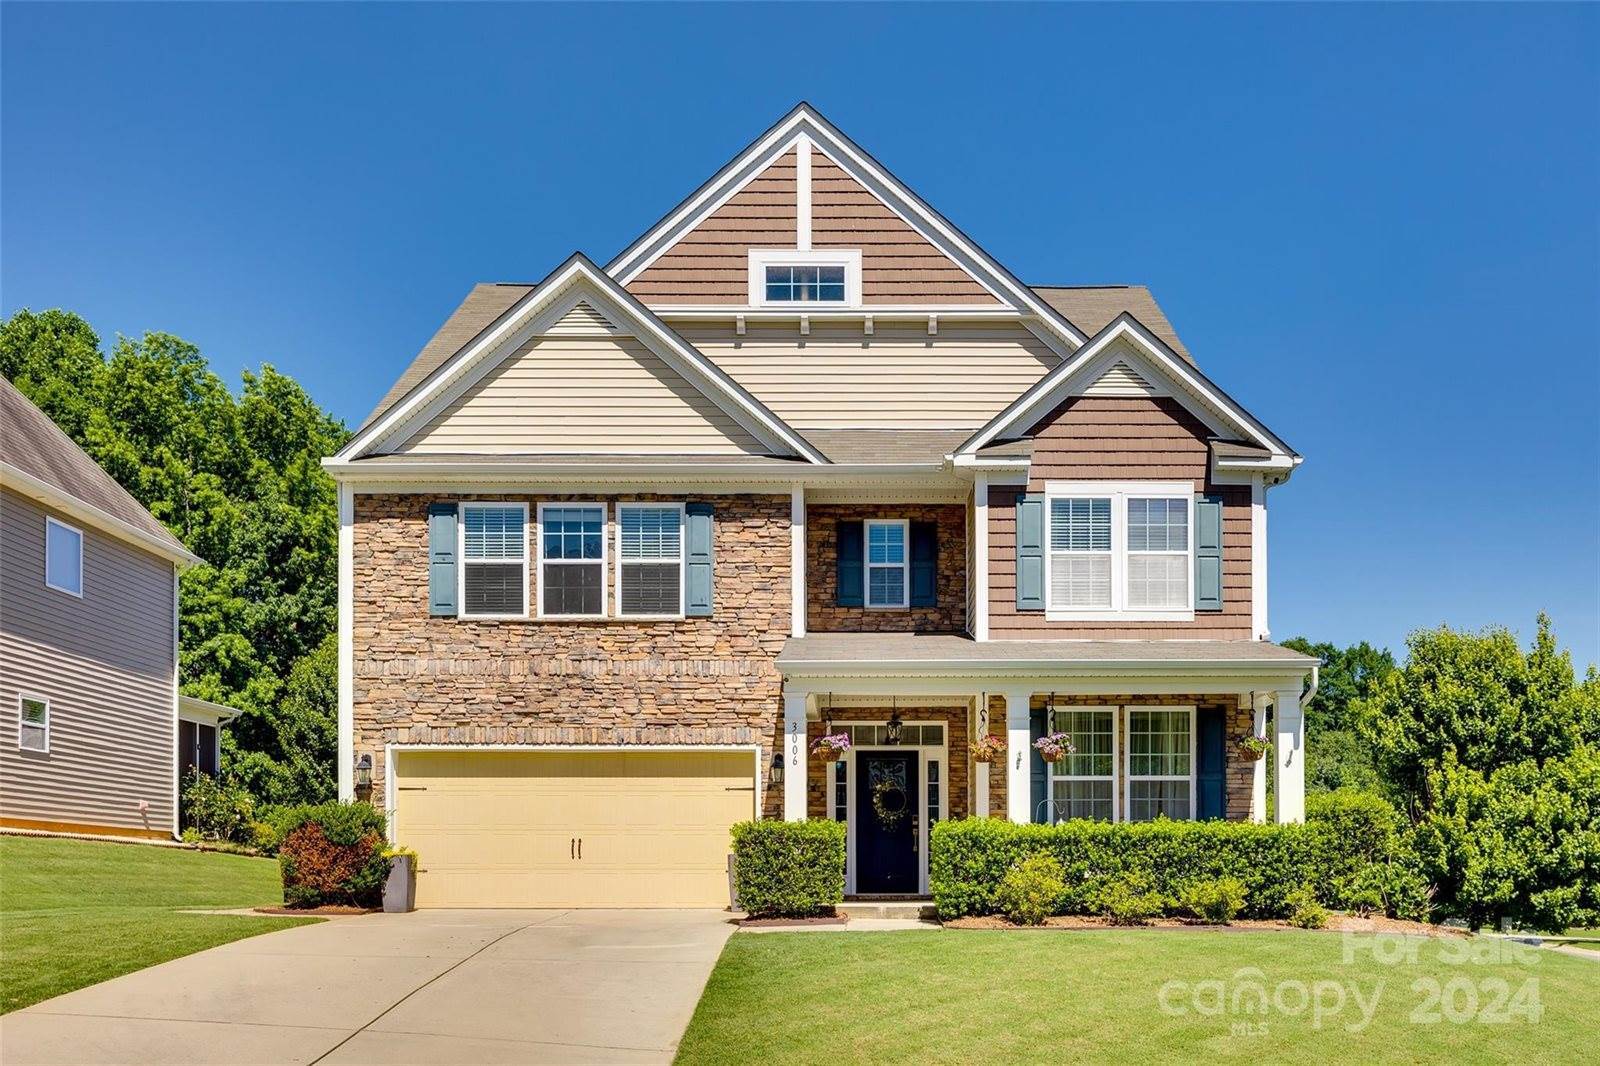 3006 Collin House Drive, Fort Mill, SC 29715